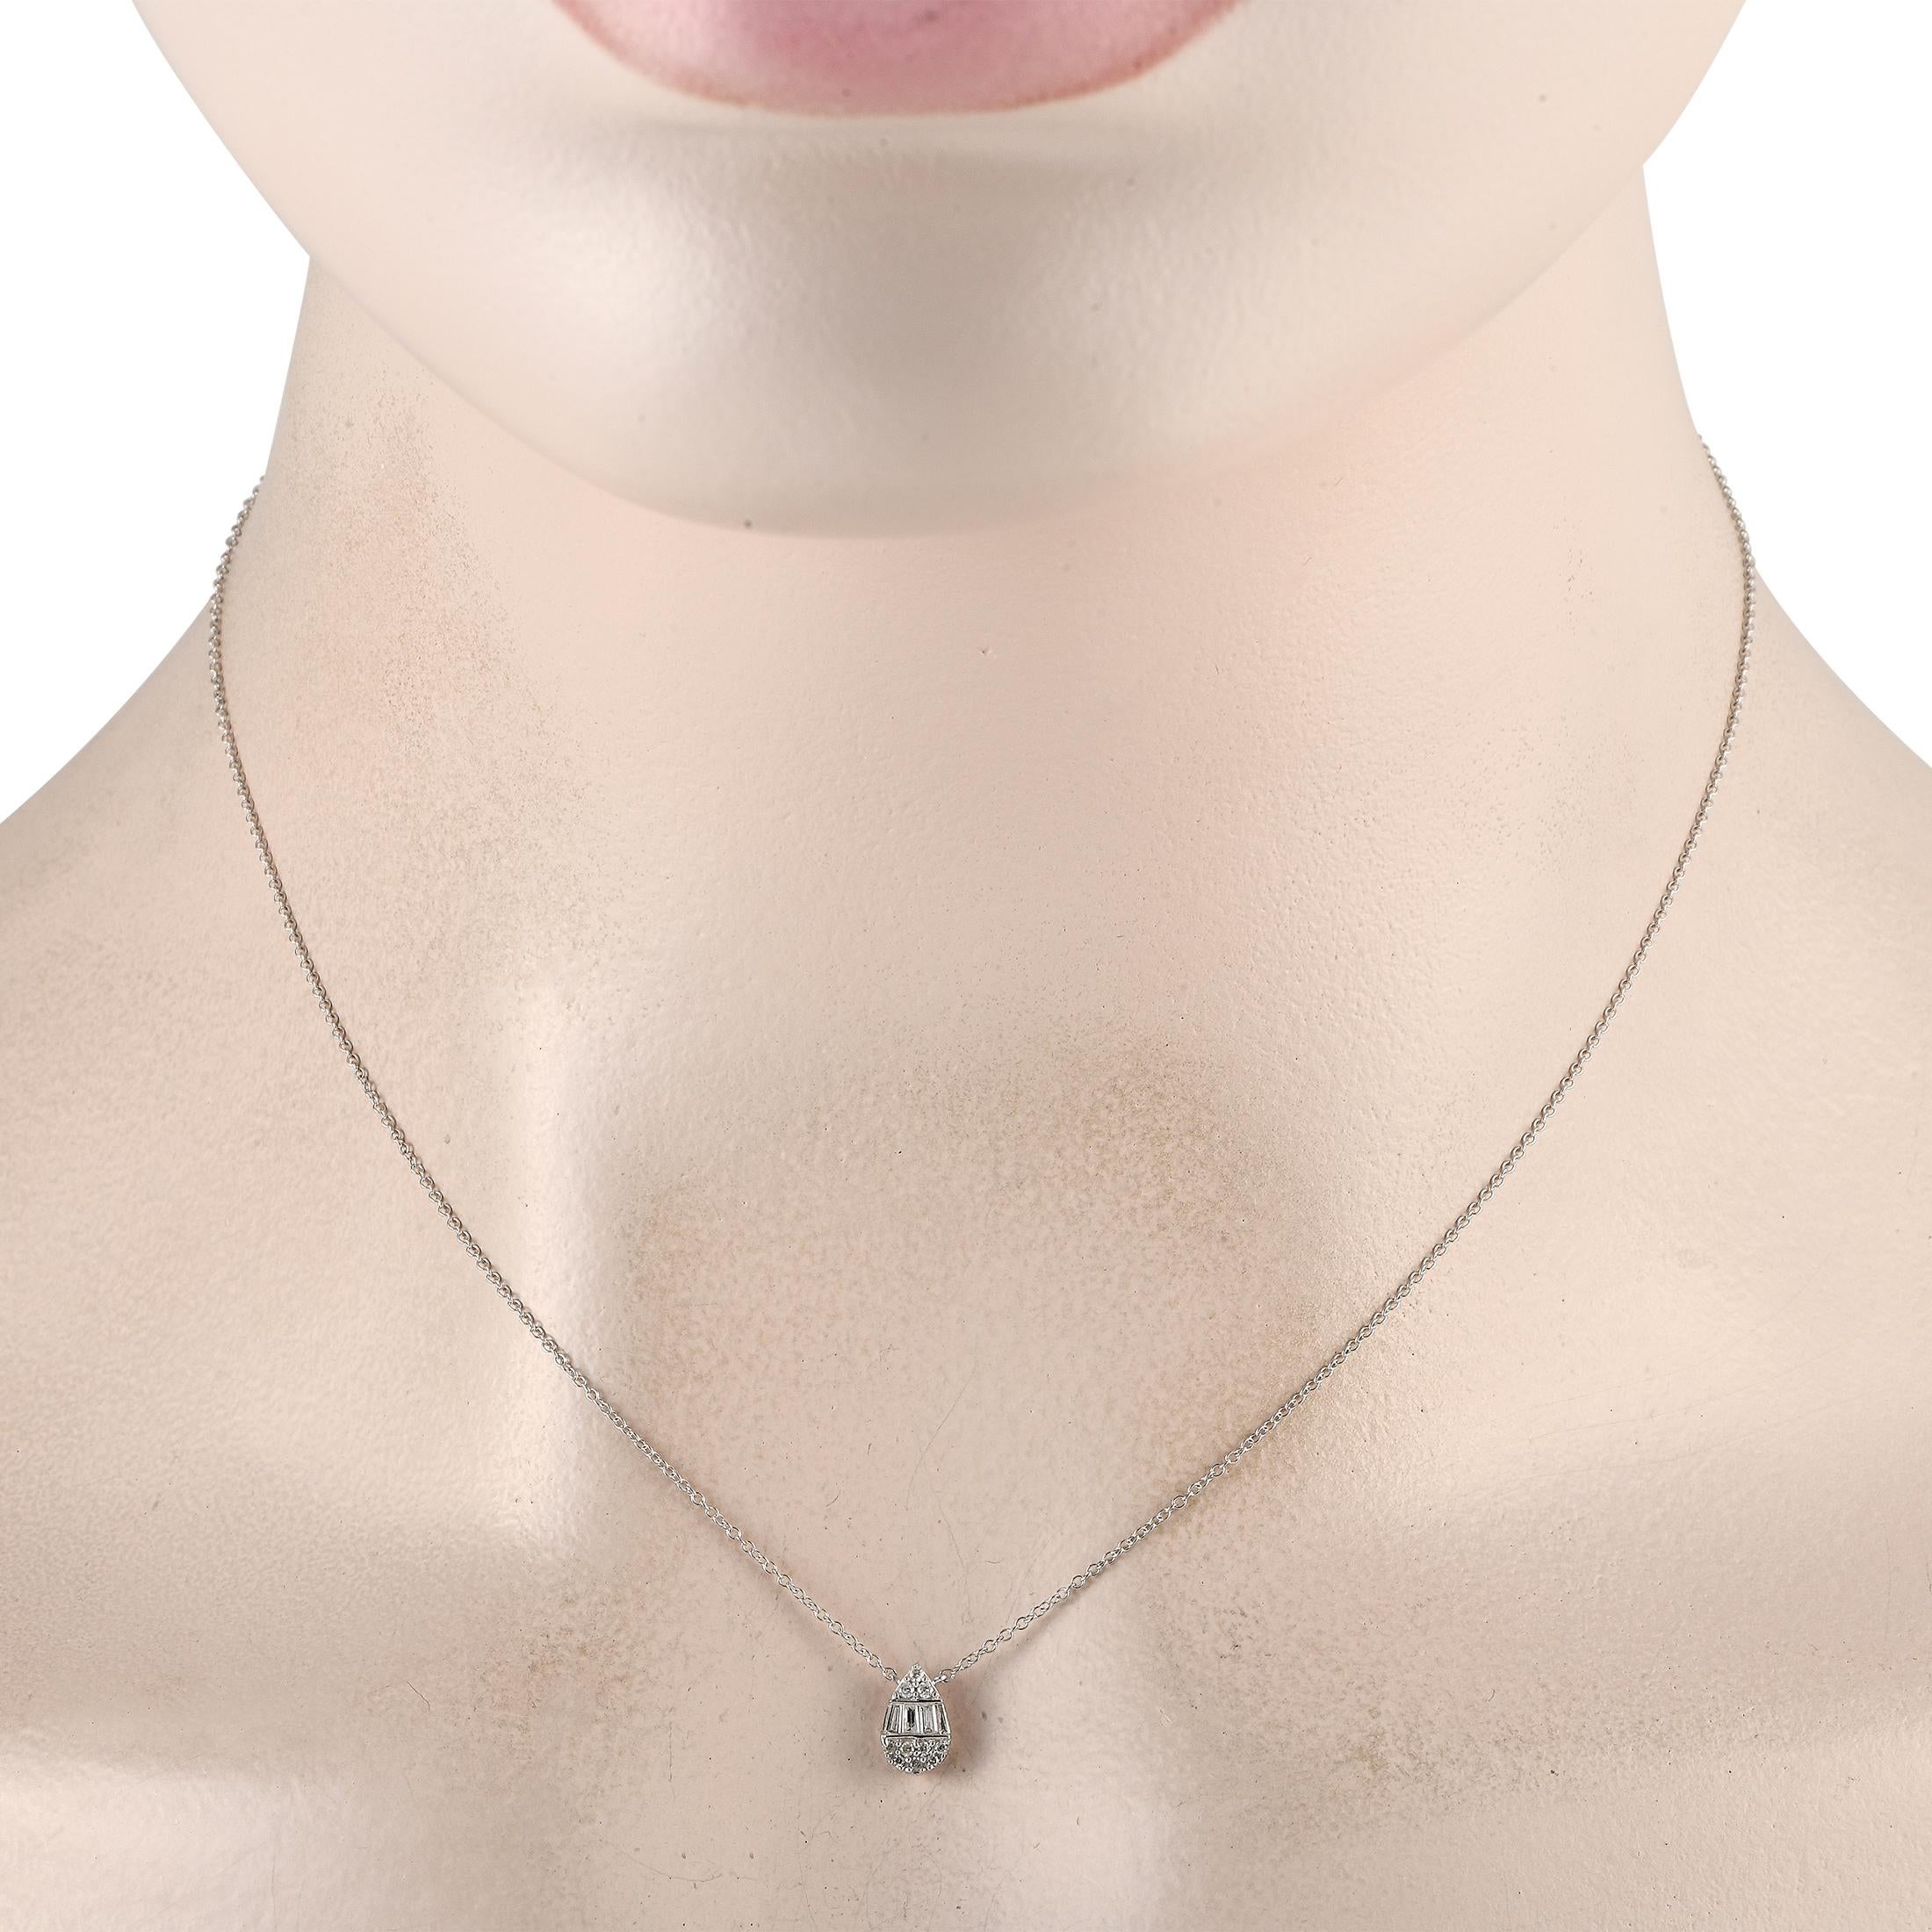 On this simple, elegant necklace, a pear-shaped pendant measuring 0.45 long by 0.15 wide provides the perfect amount of sparkle thanks to Diamonds with a total weight of 0.15 carats. Ideal for everyday wear, this perfectly understated accessory is